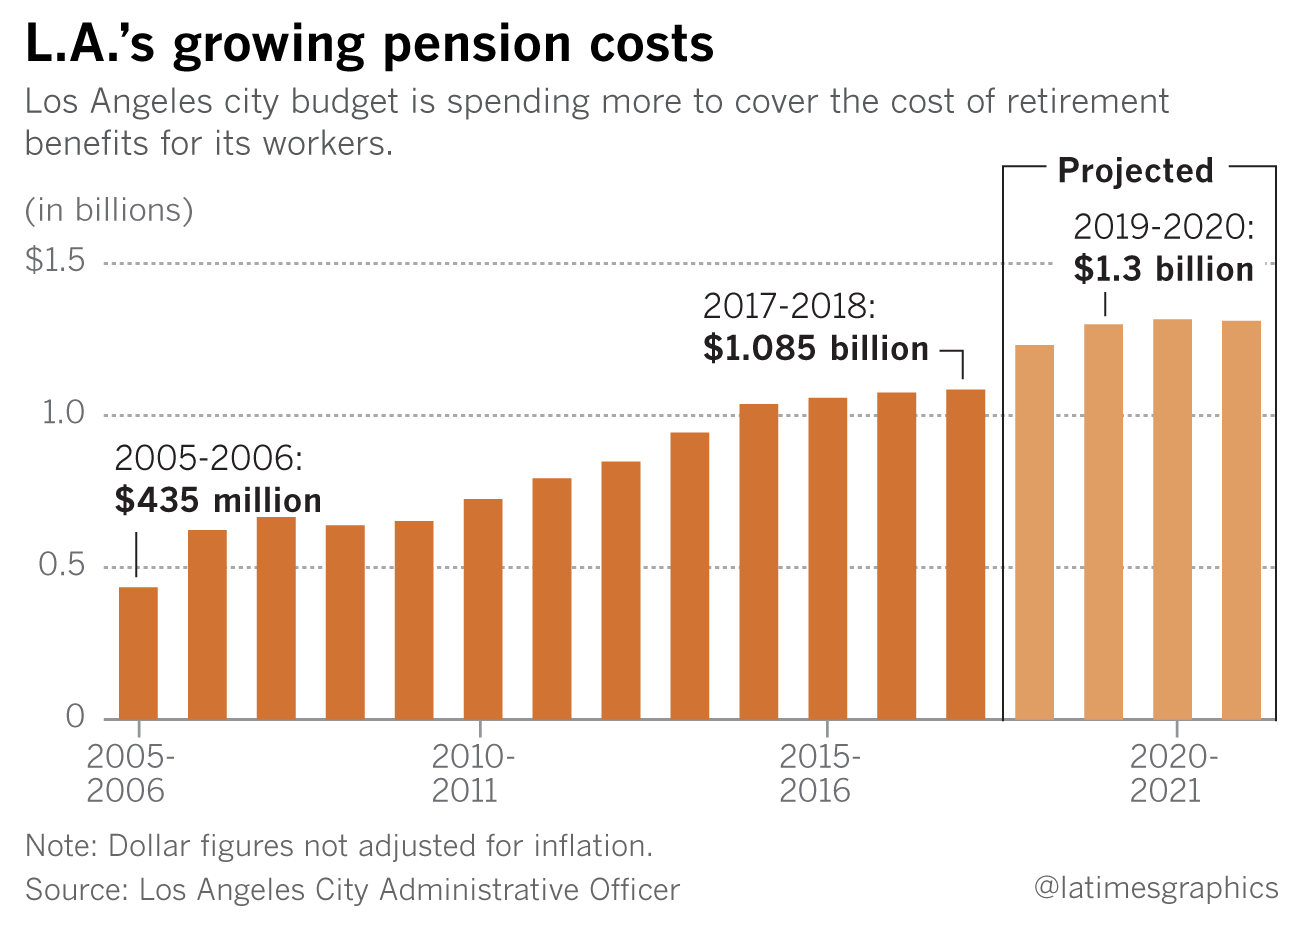 A report issued in April projected a $215 million increase in retirement costs over two years, if two pension boards lower their earnings projections. That figure could grow, depending on coming budget decisions.